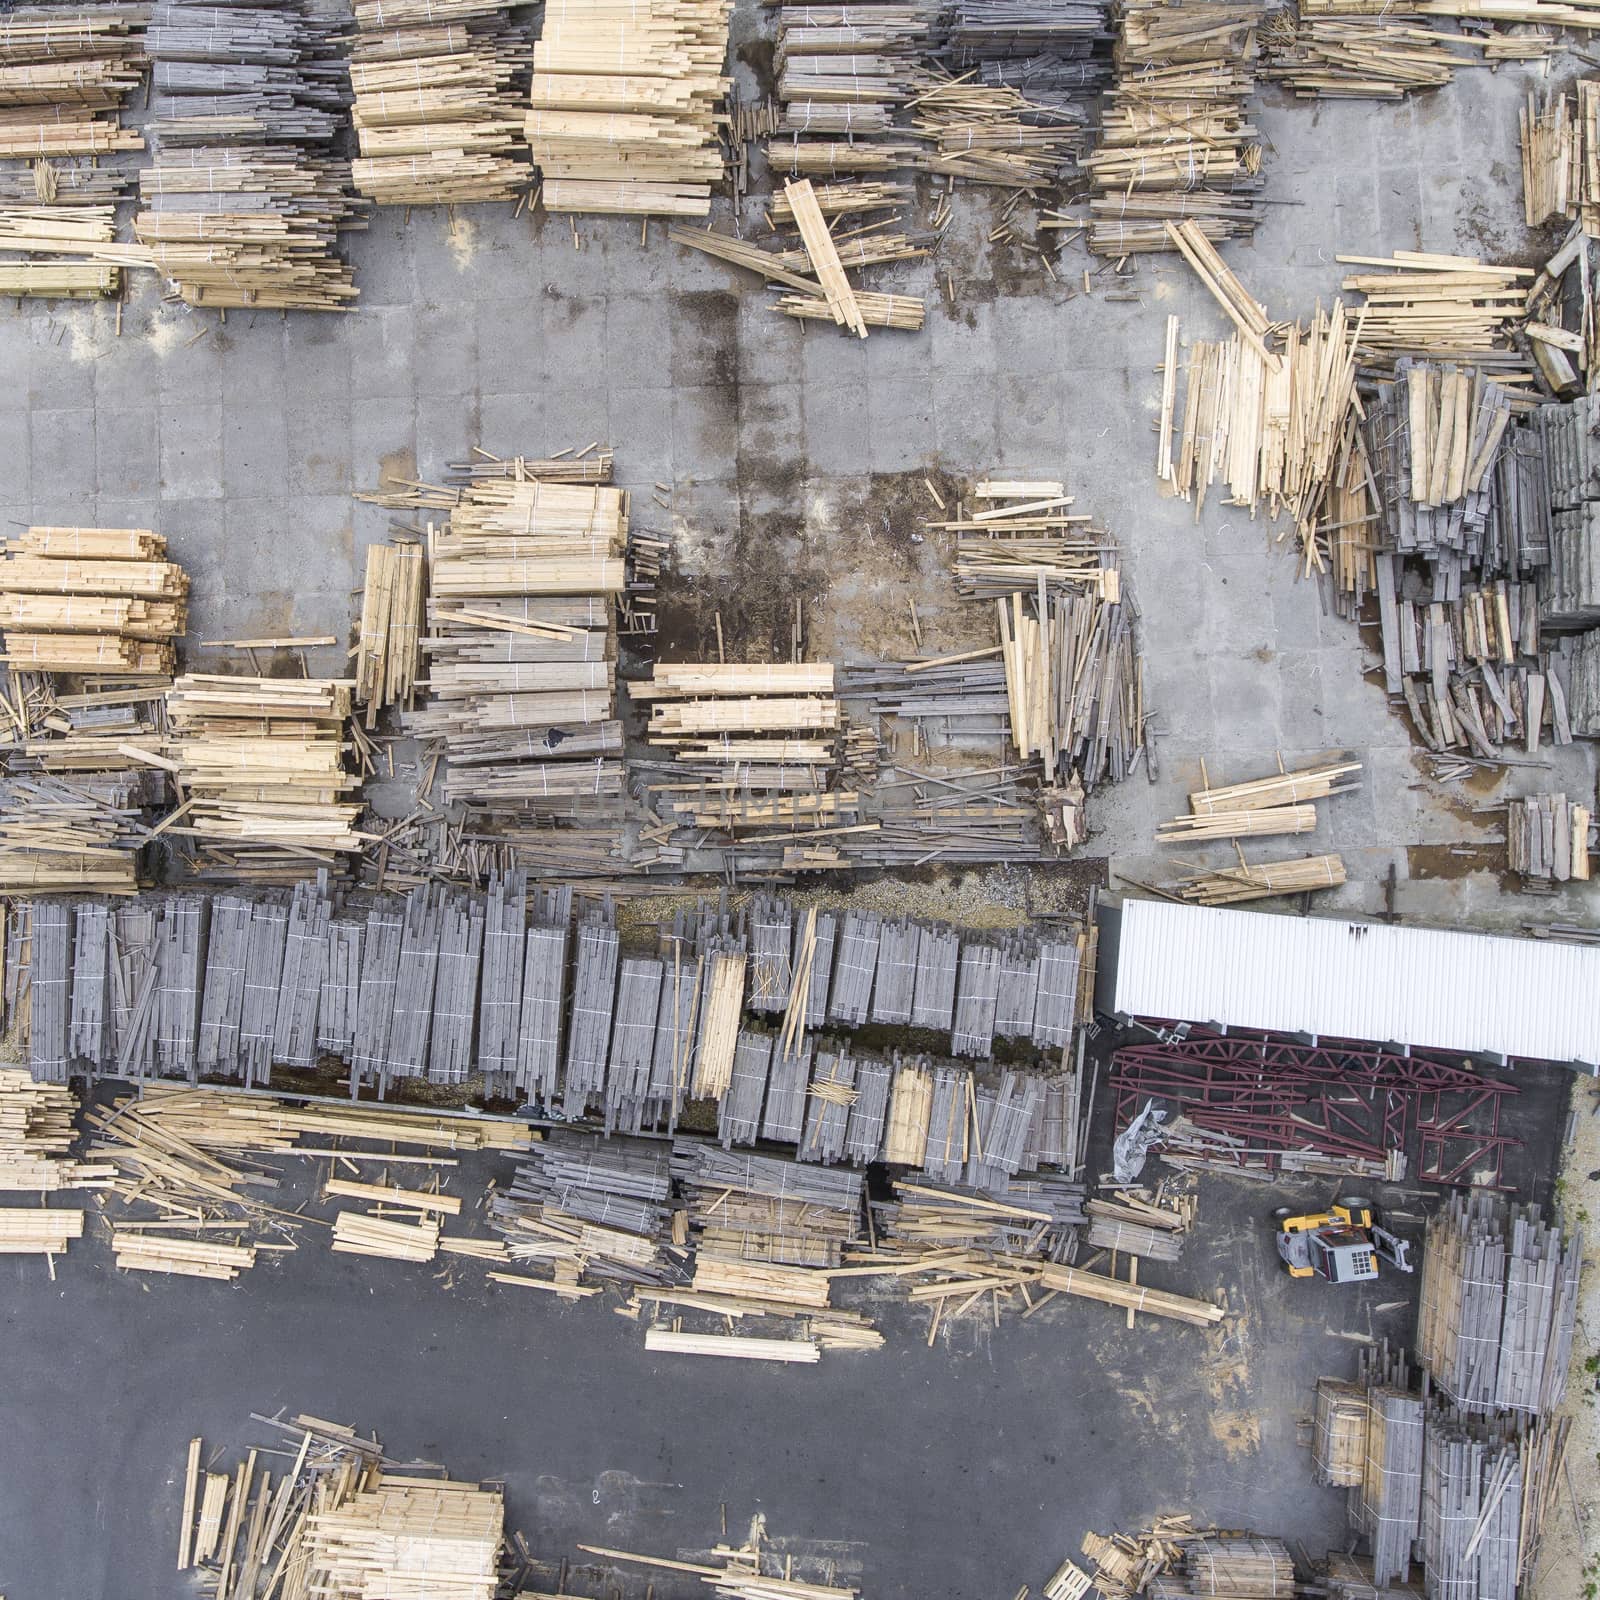 Sawmill. Felled trees, logs stacked in a pile. View from above.  by mariusz_prusaczyk